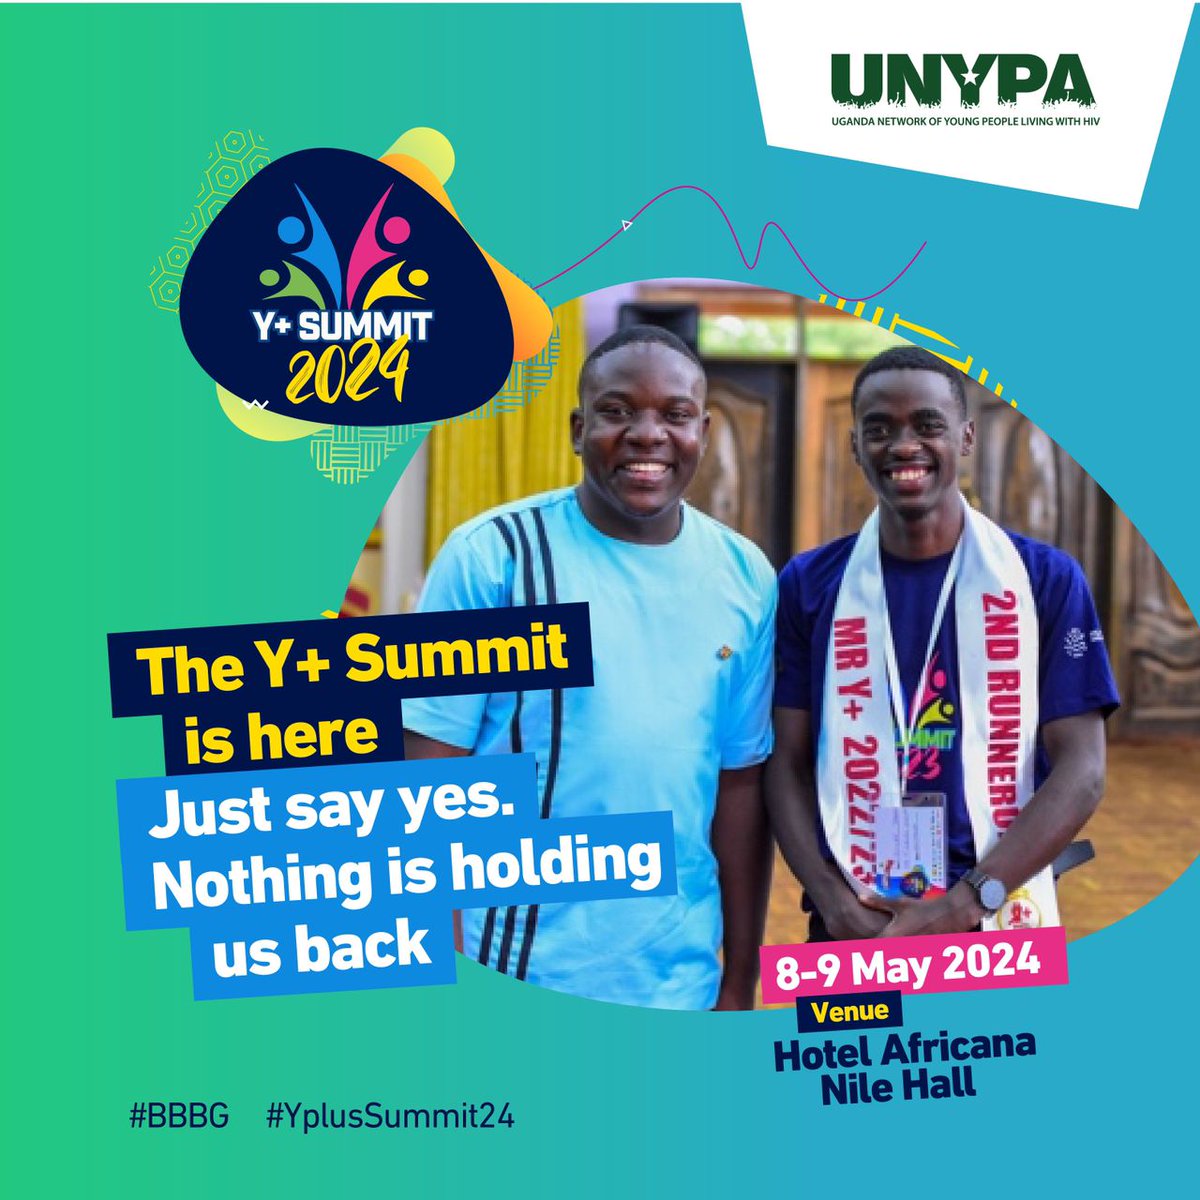 Yes, the #YPlusSummit24 is here again! It's an exciting opportunity to connect, learn, and inspire positive change. #BBBG